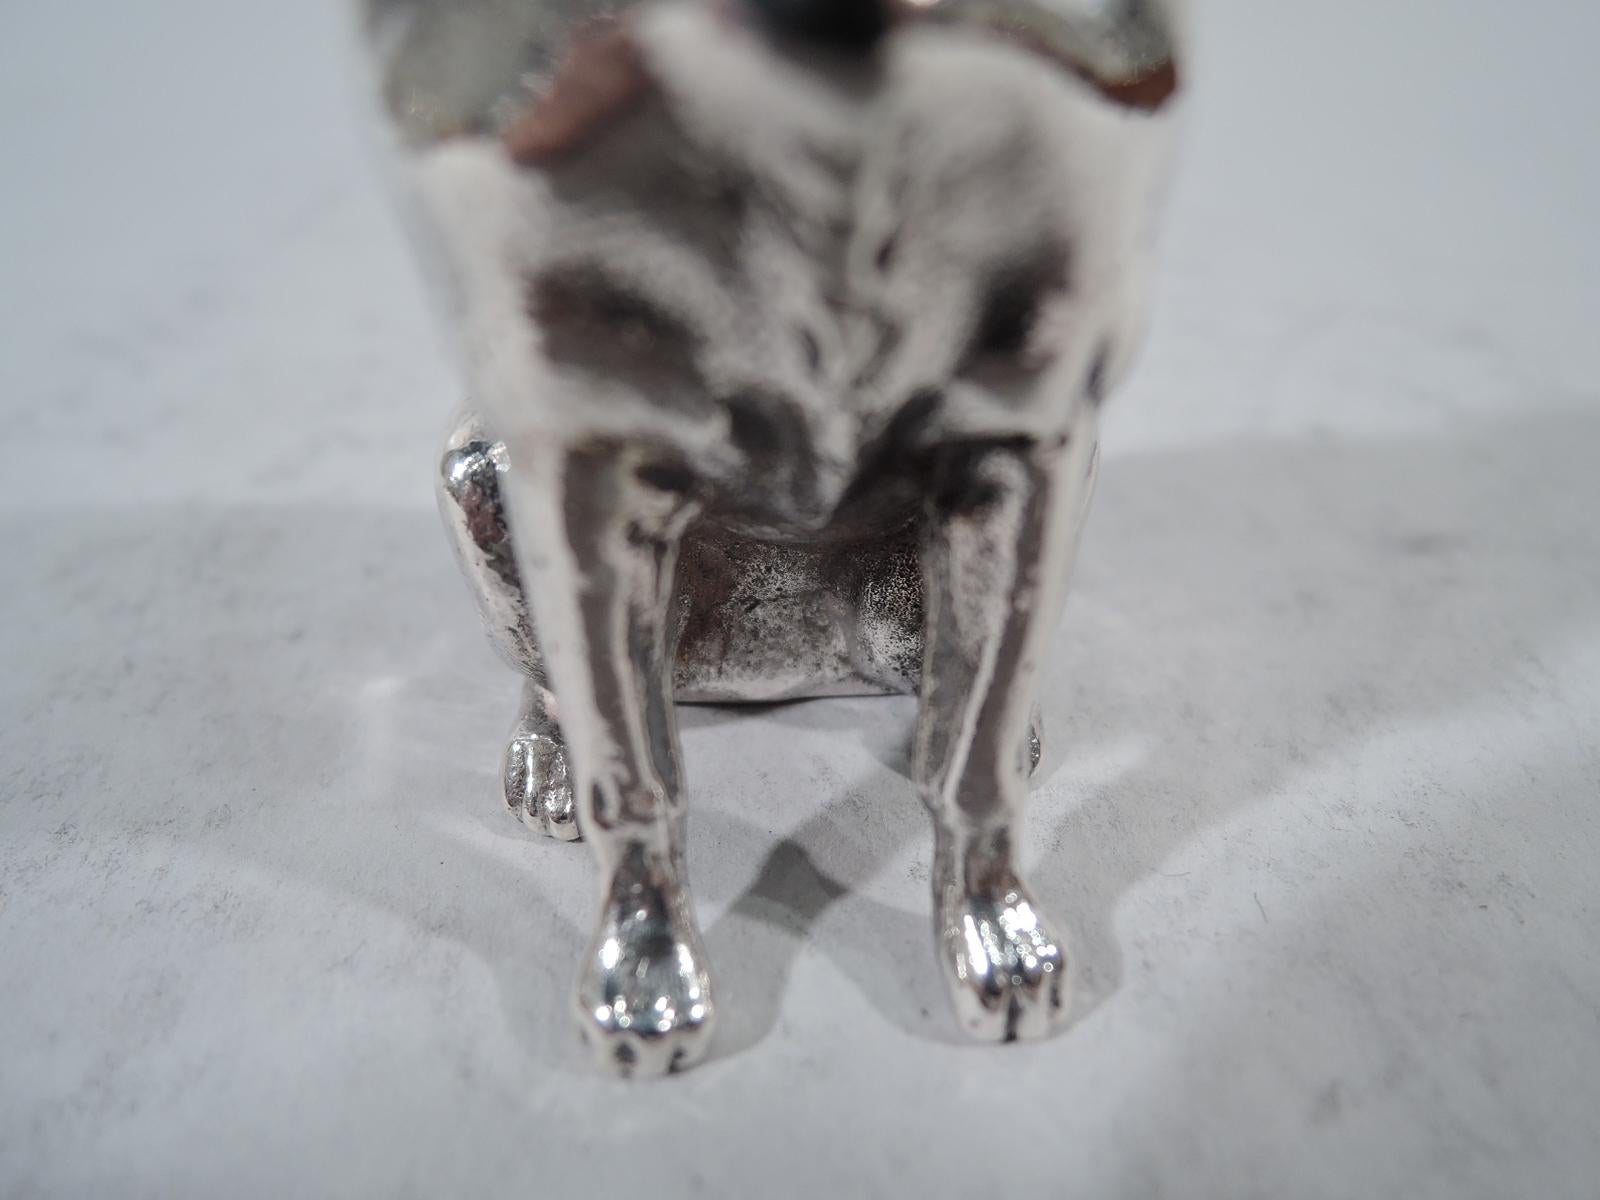 Late 19th Century Pair of Dominick & Haff Sterling Silver Salt and Pepper Pug Dog Shakers